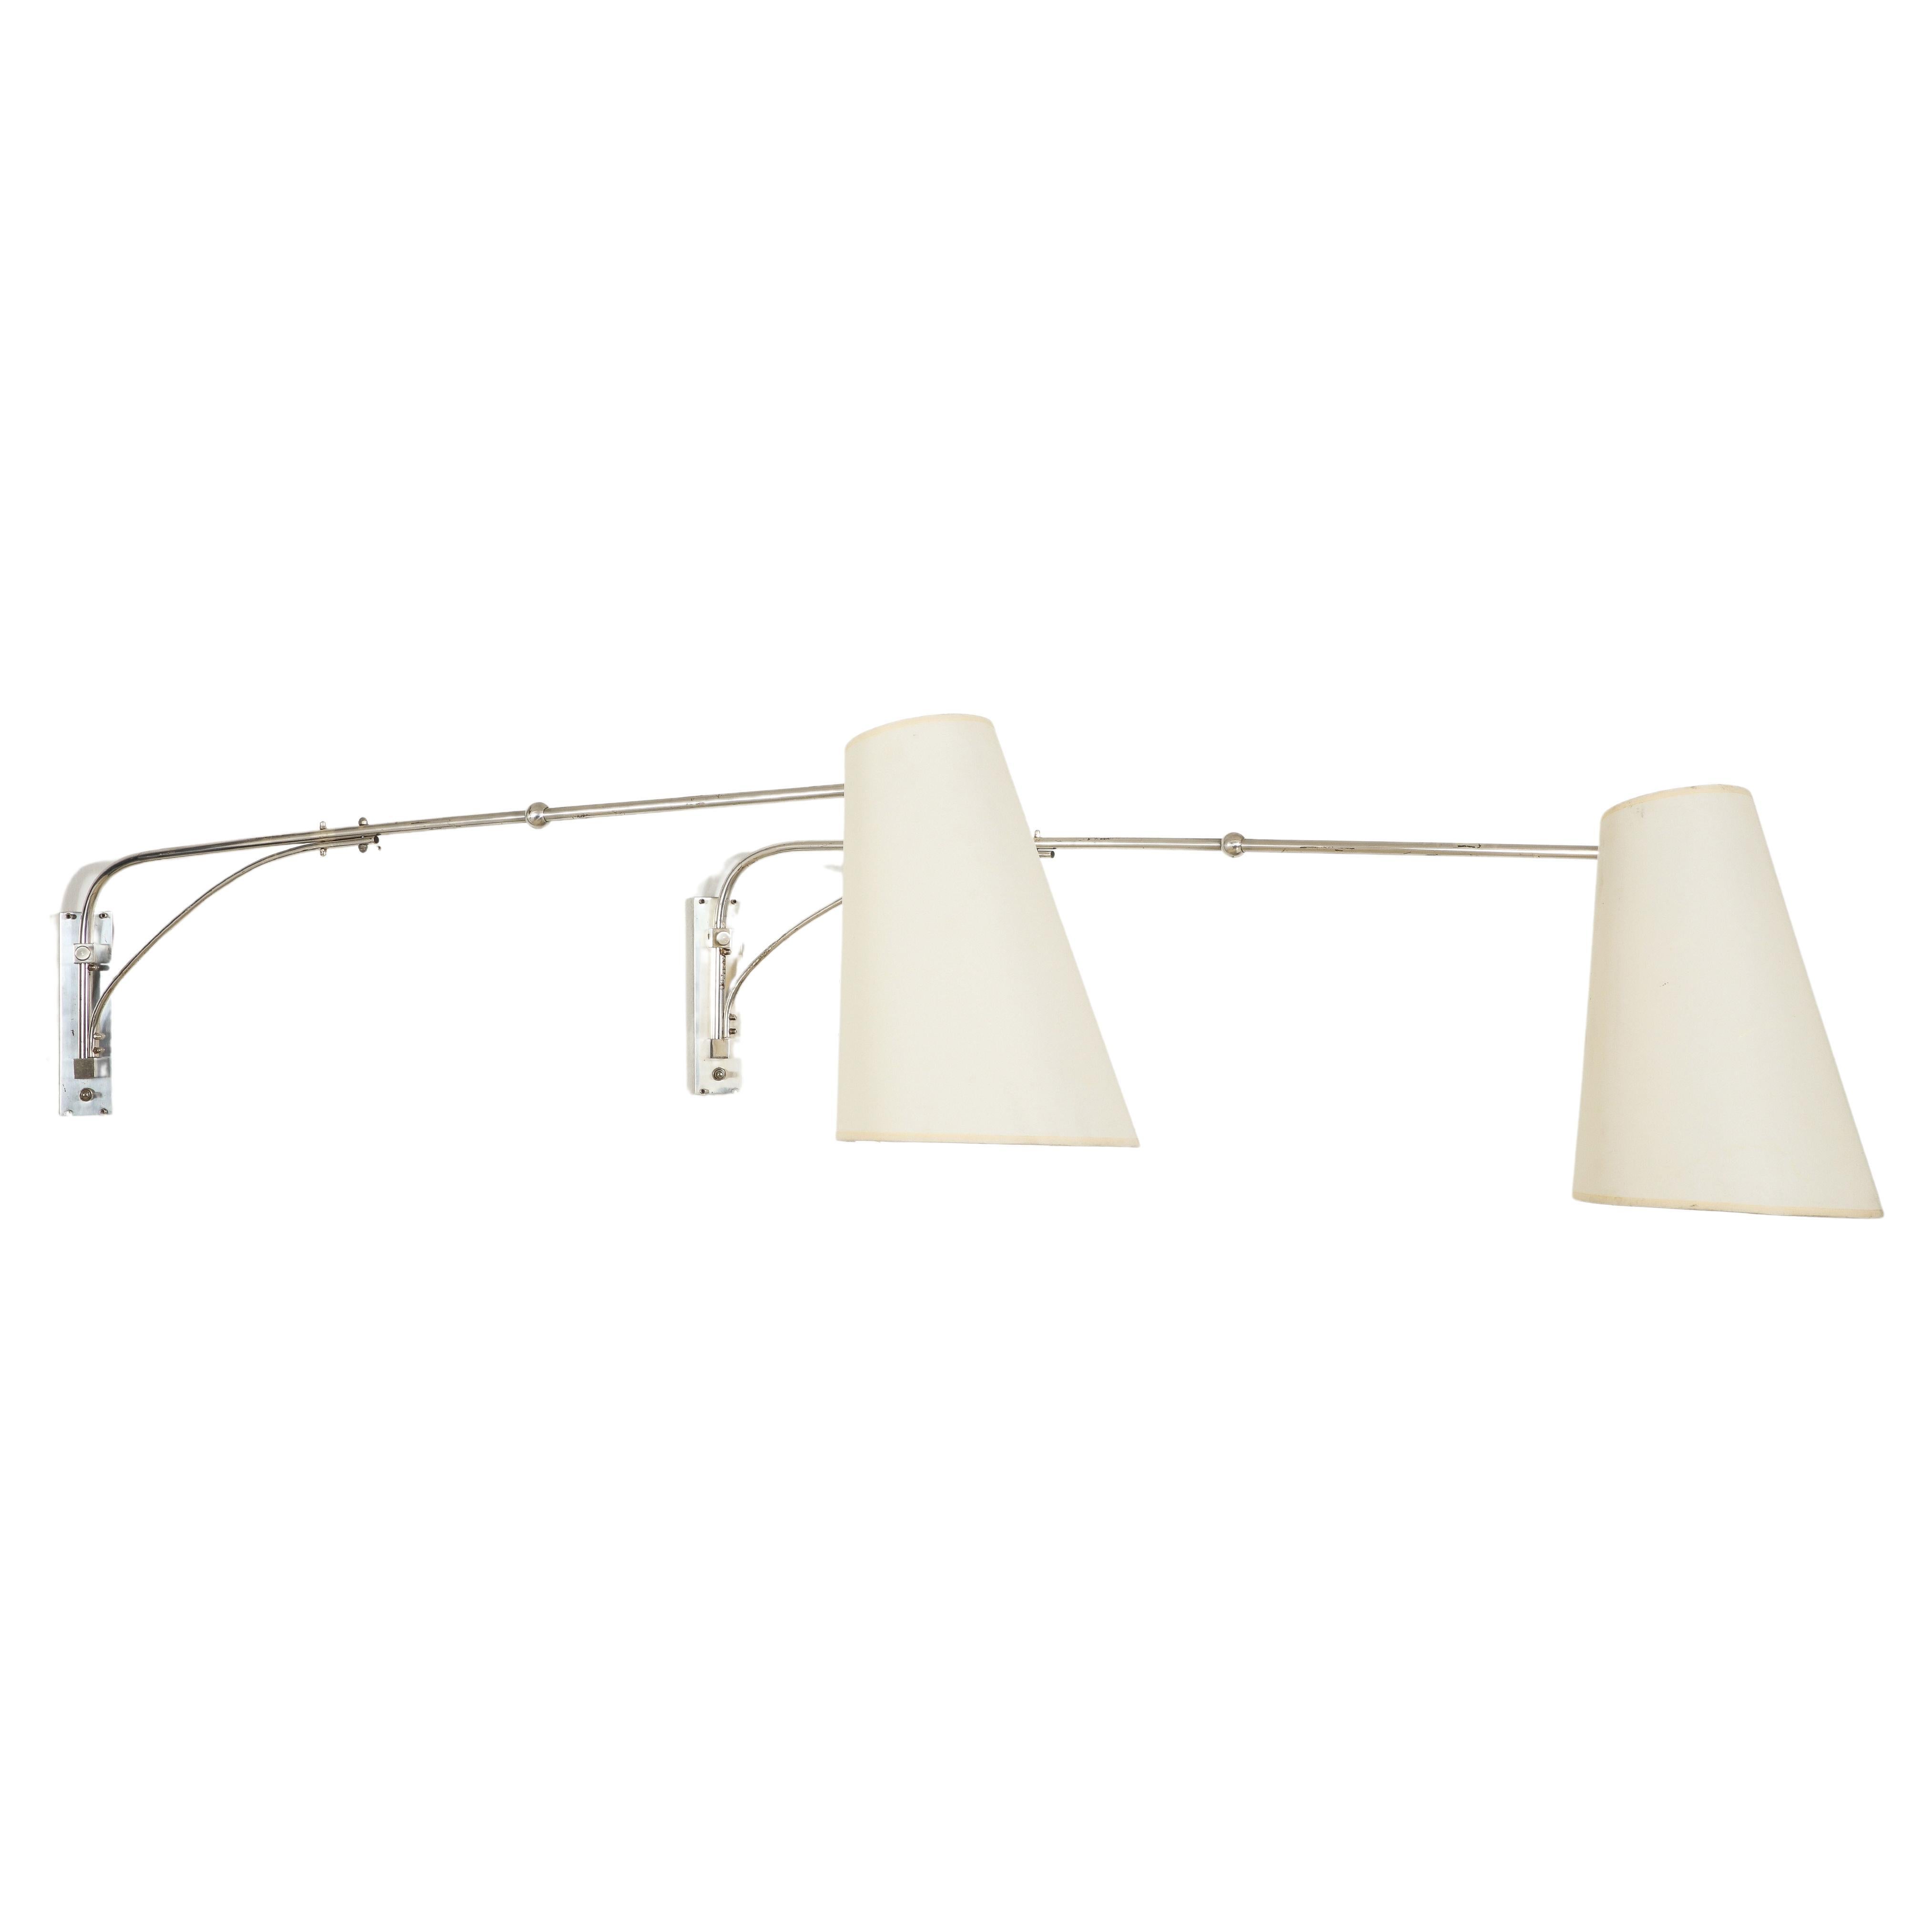 Large Lunel Nickel Plated Swing Arm Sconces, France 1960's